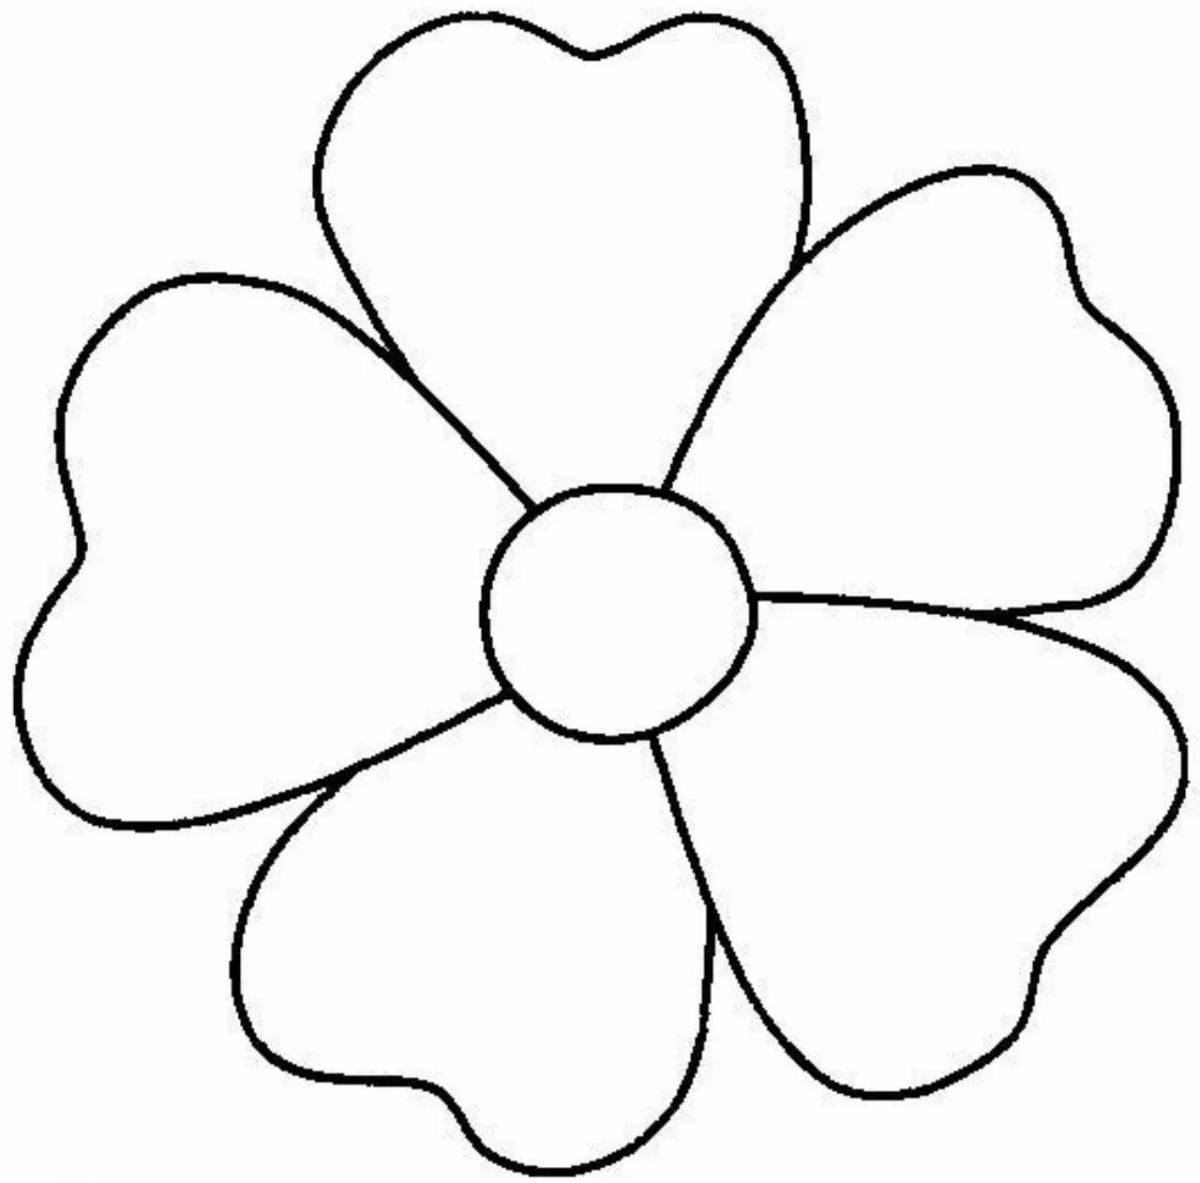 Amazing coloring book with flowers